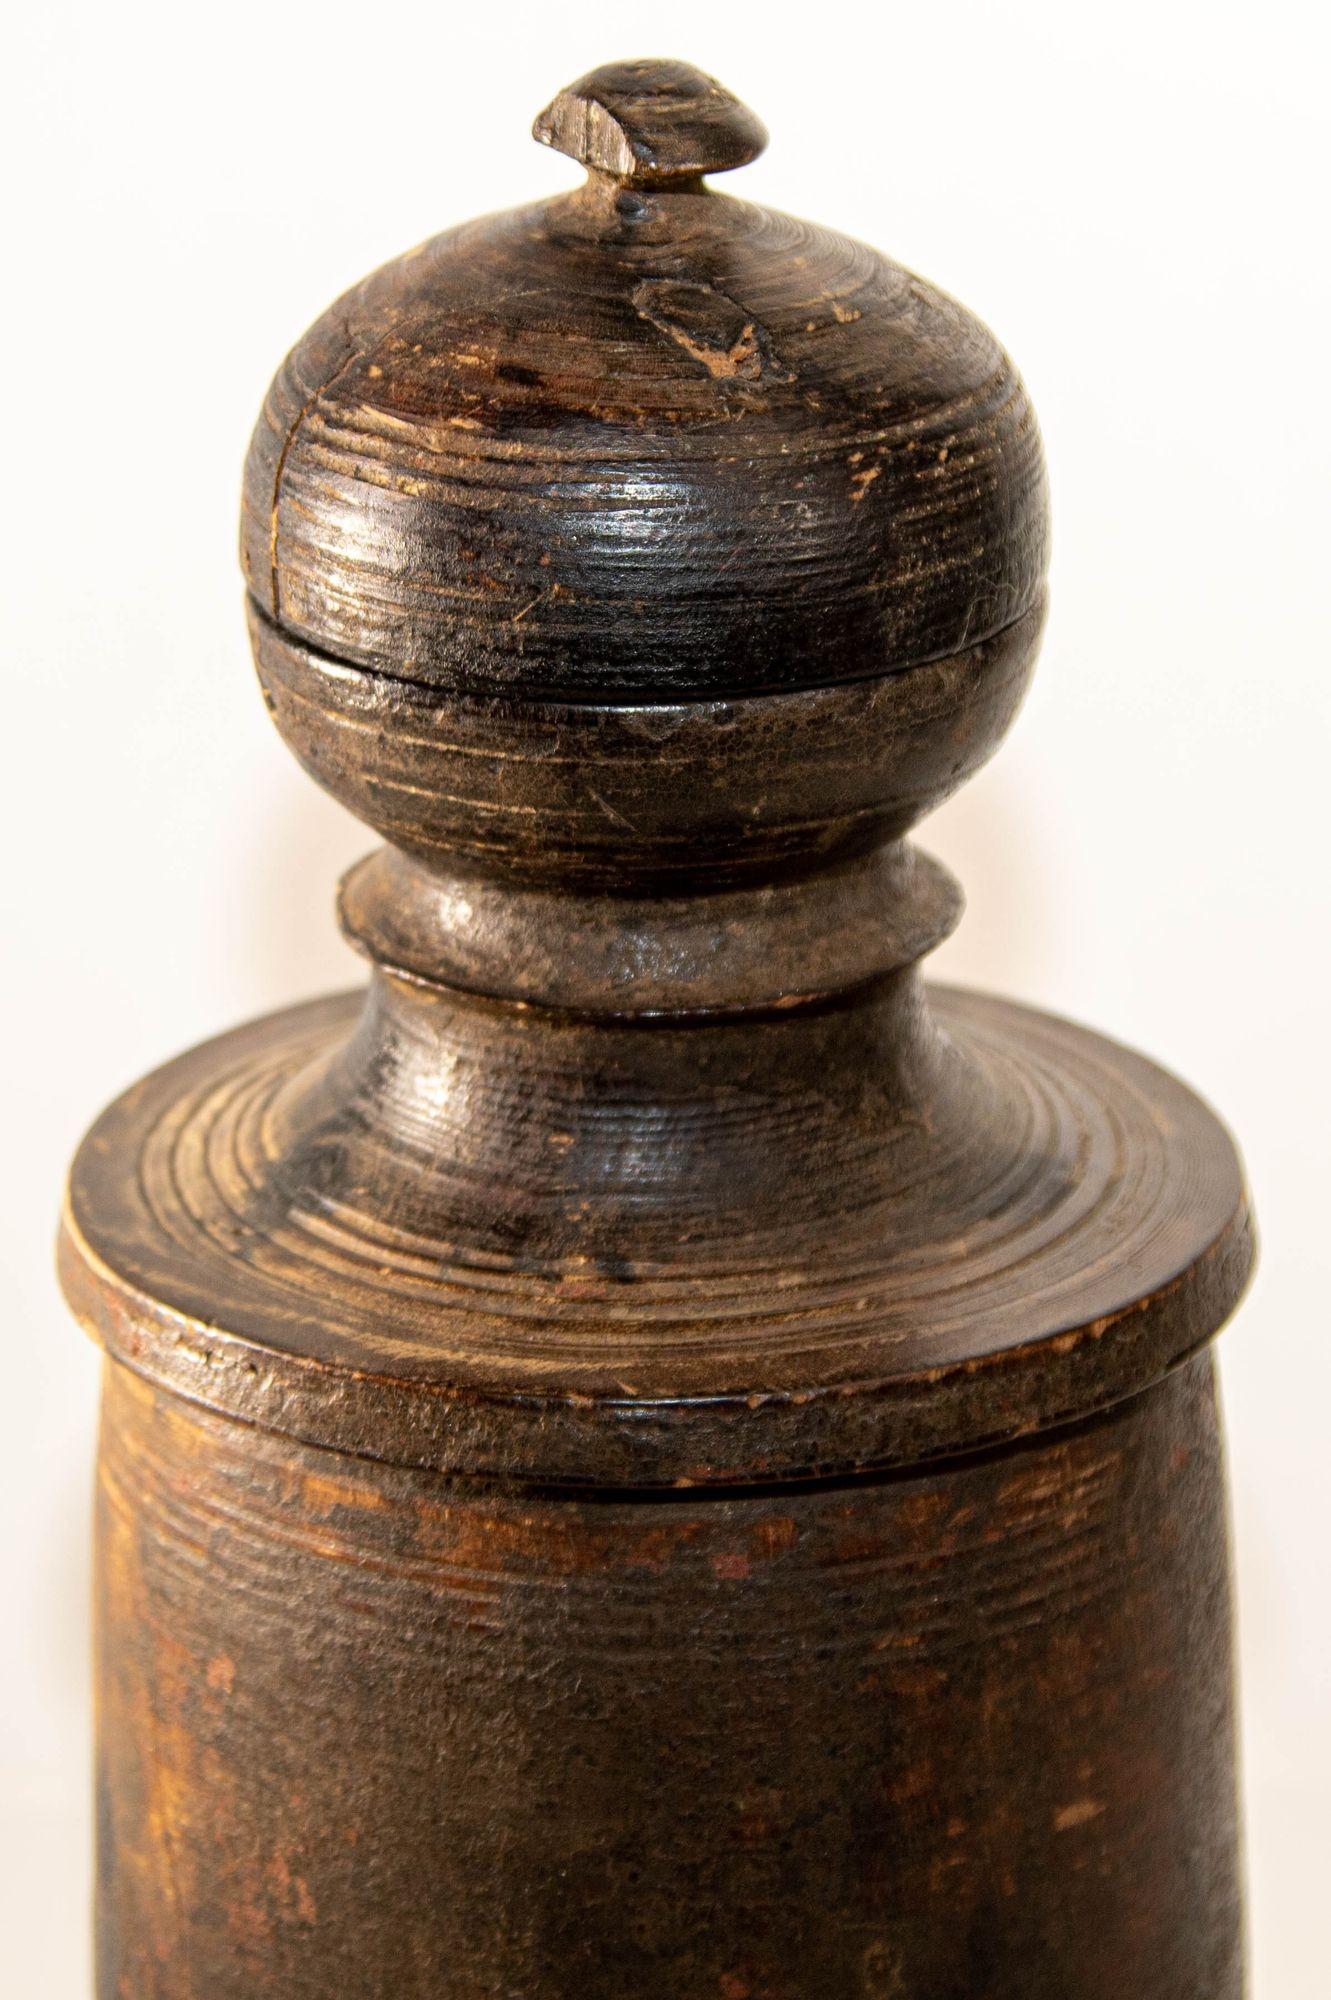 Antique Wooden Pot or Tekhi, from Nepal, 13